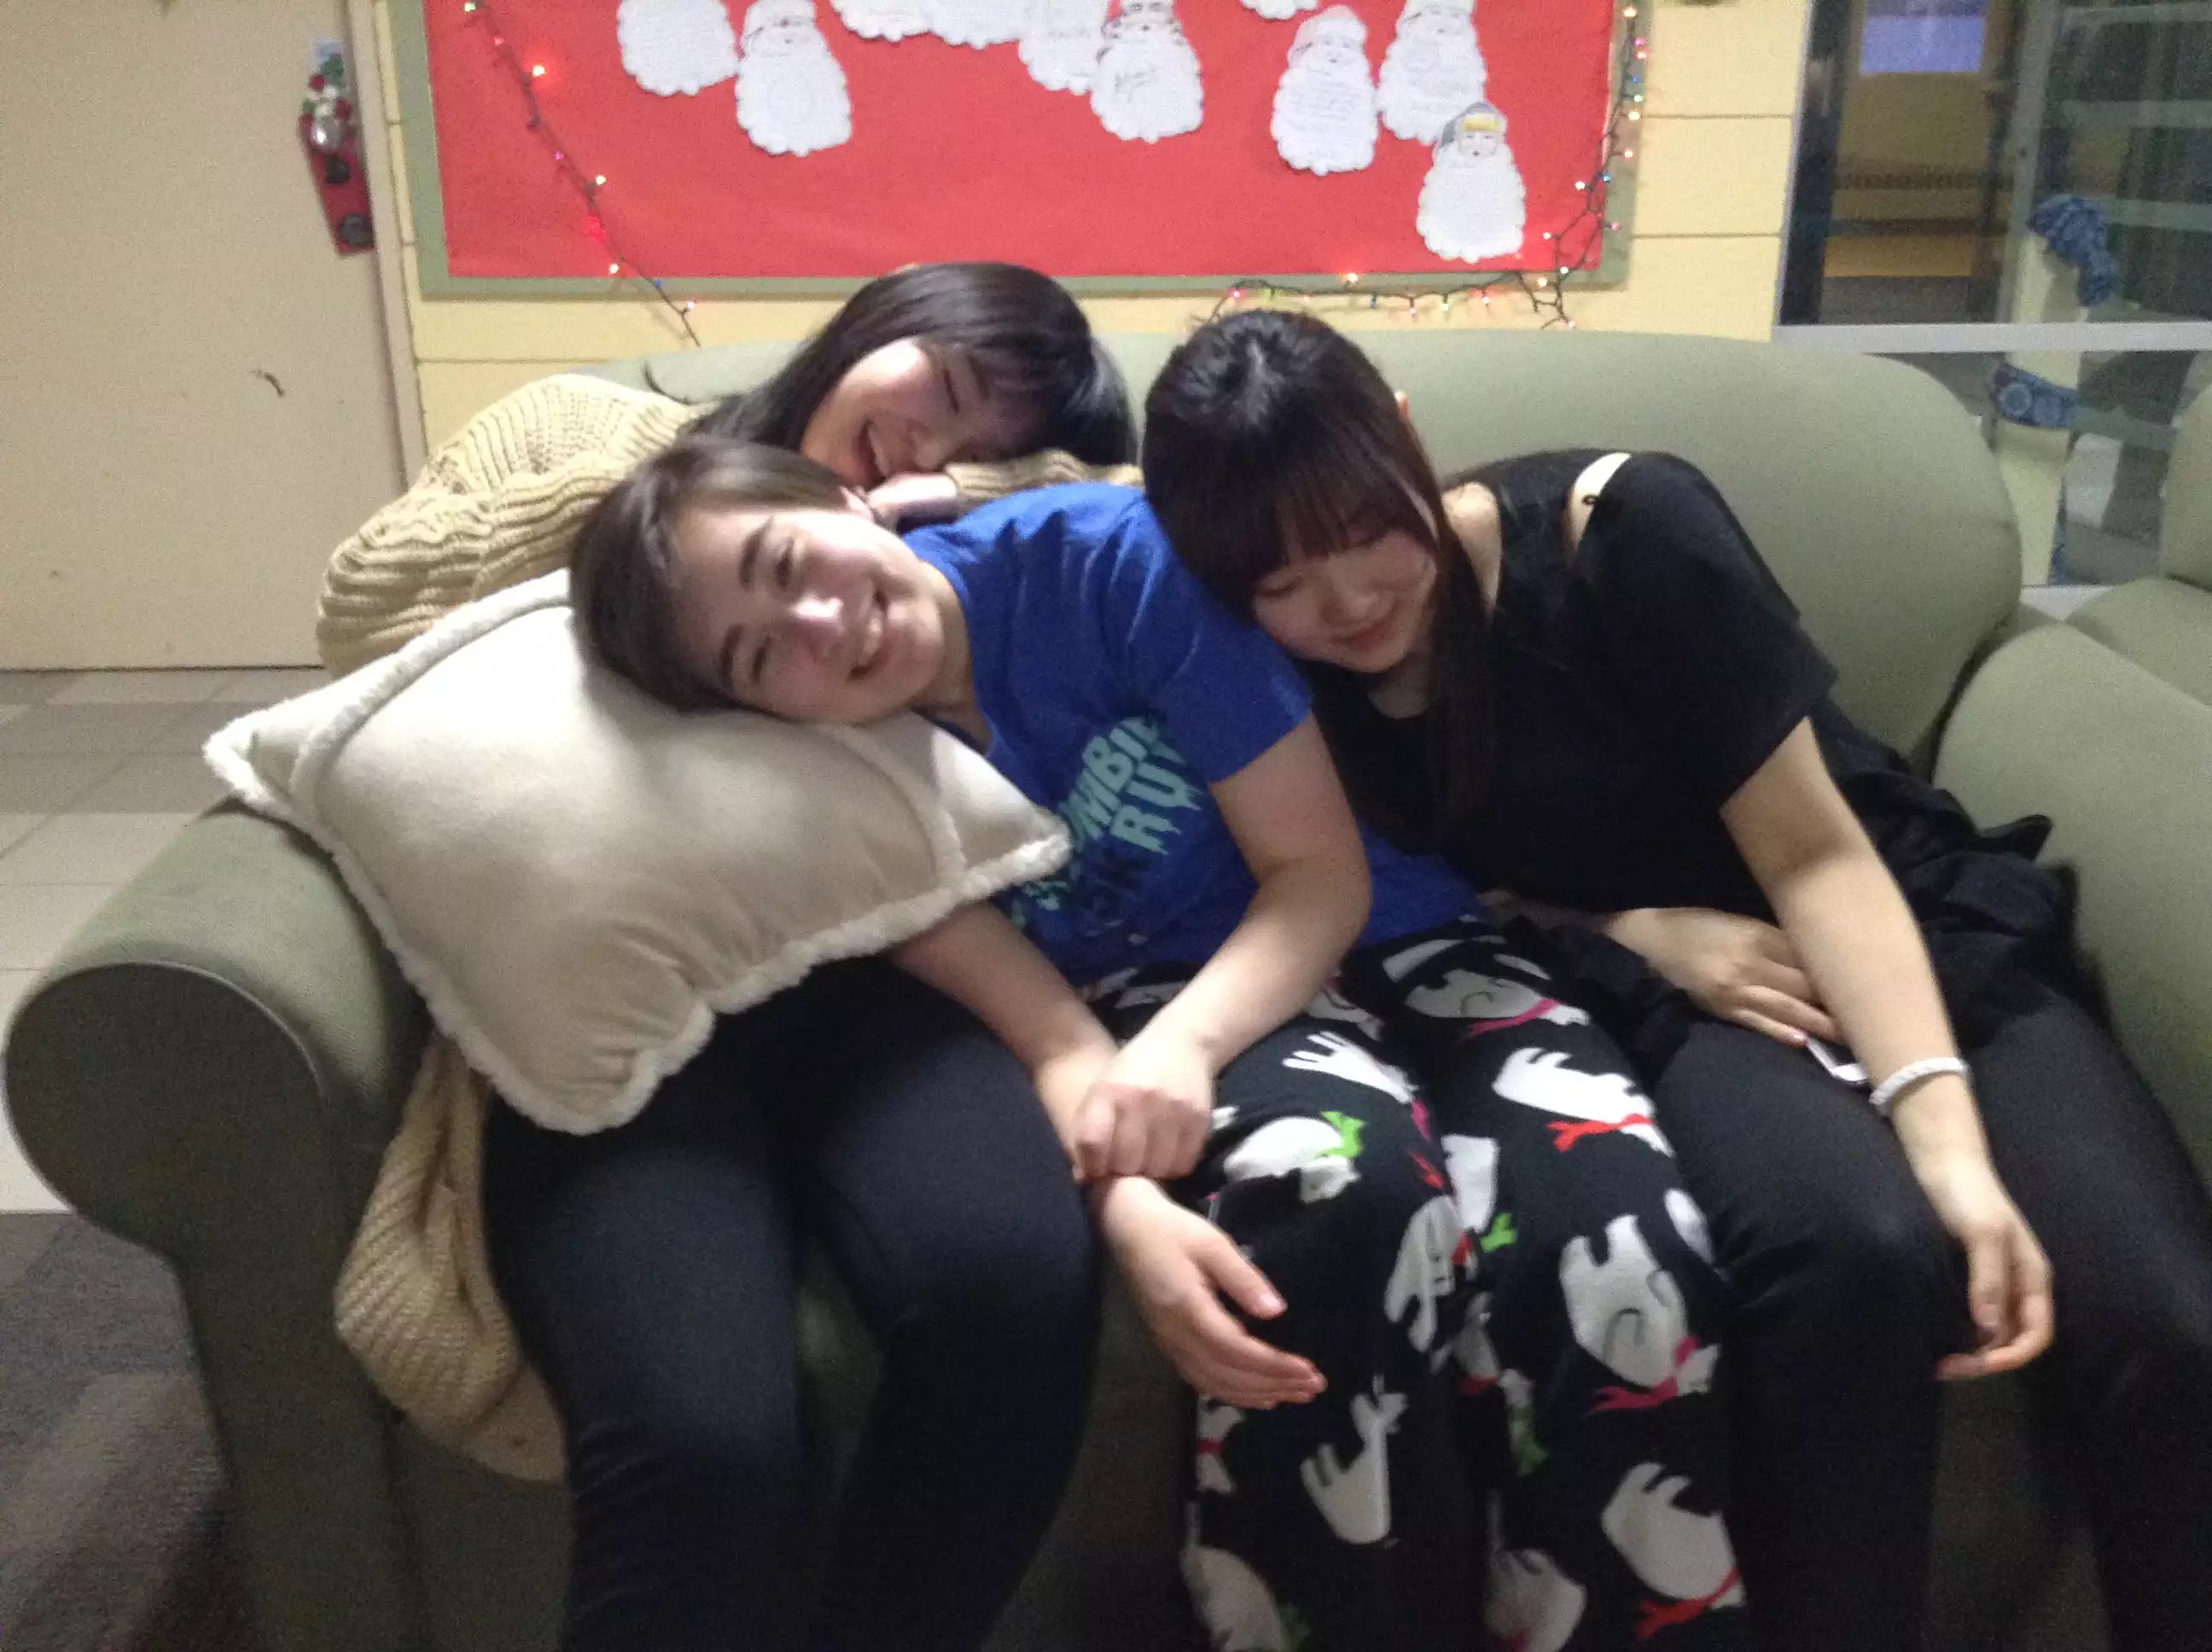 Mei and friends in pajamas on a couch